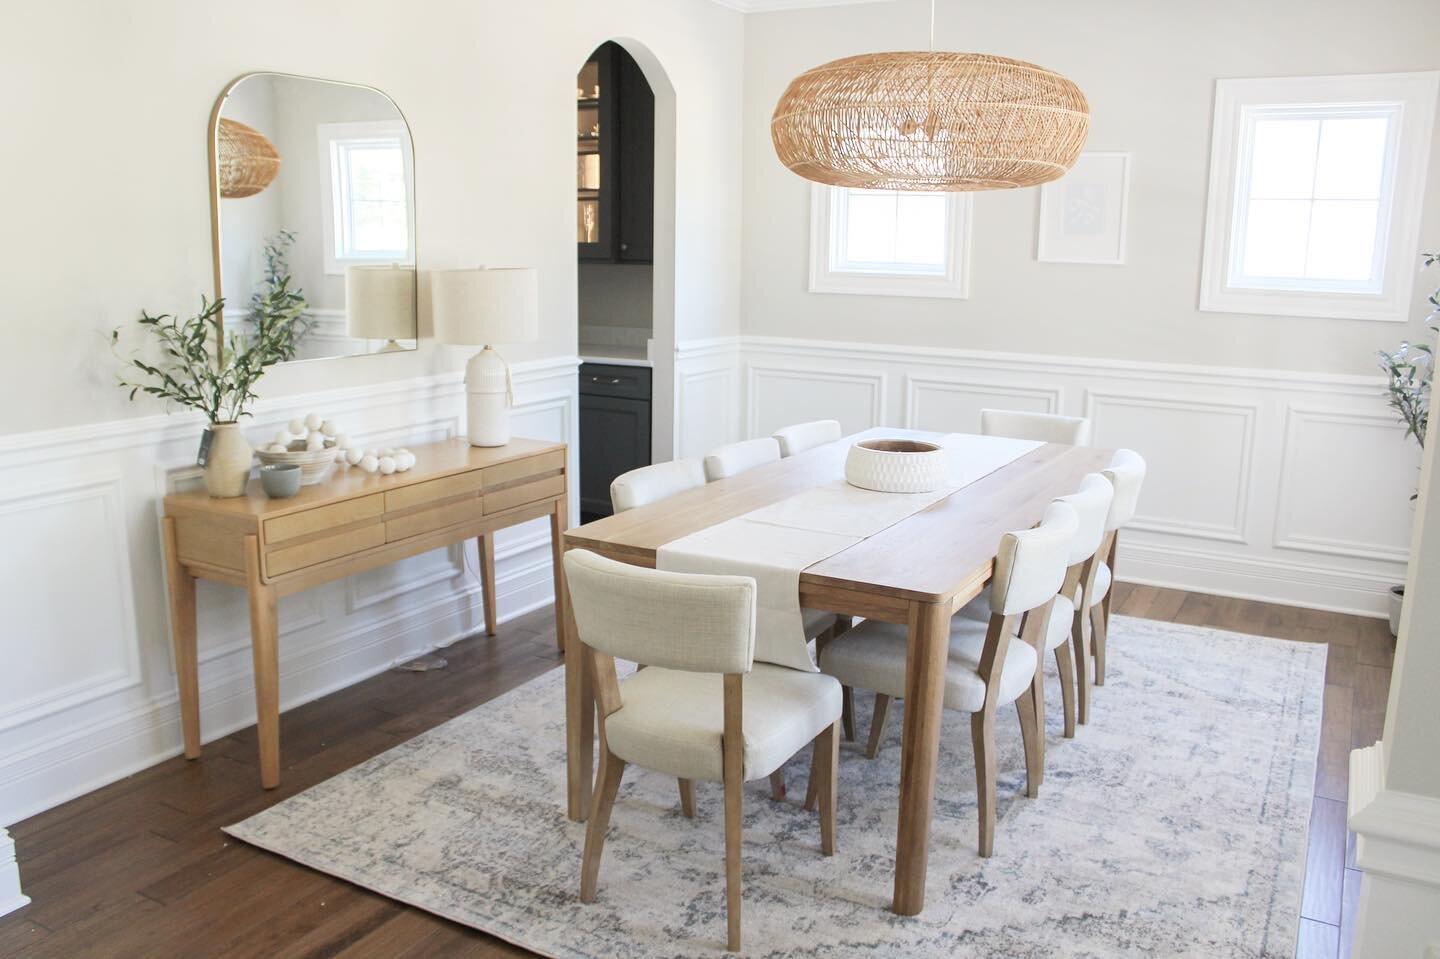 #Kirkwoodcustomhome dining room turned out to be the perfect blend of coastal and classic. 

#interiordesign #coastalliving #interiordesigner #stlhomes #diningroomdecor